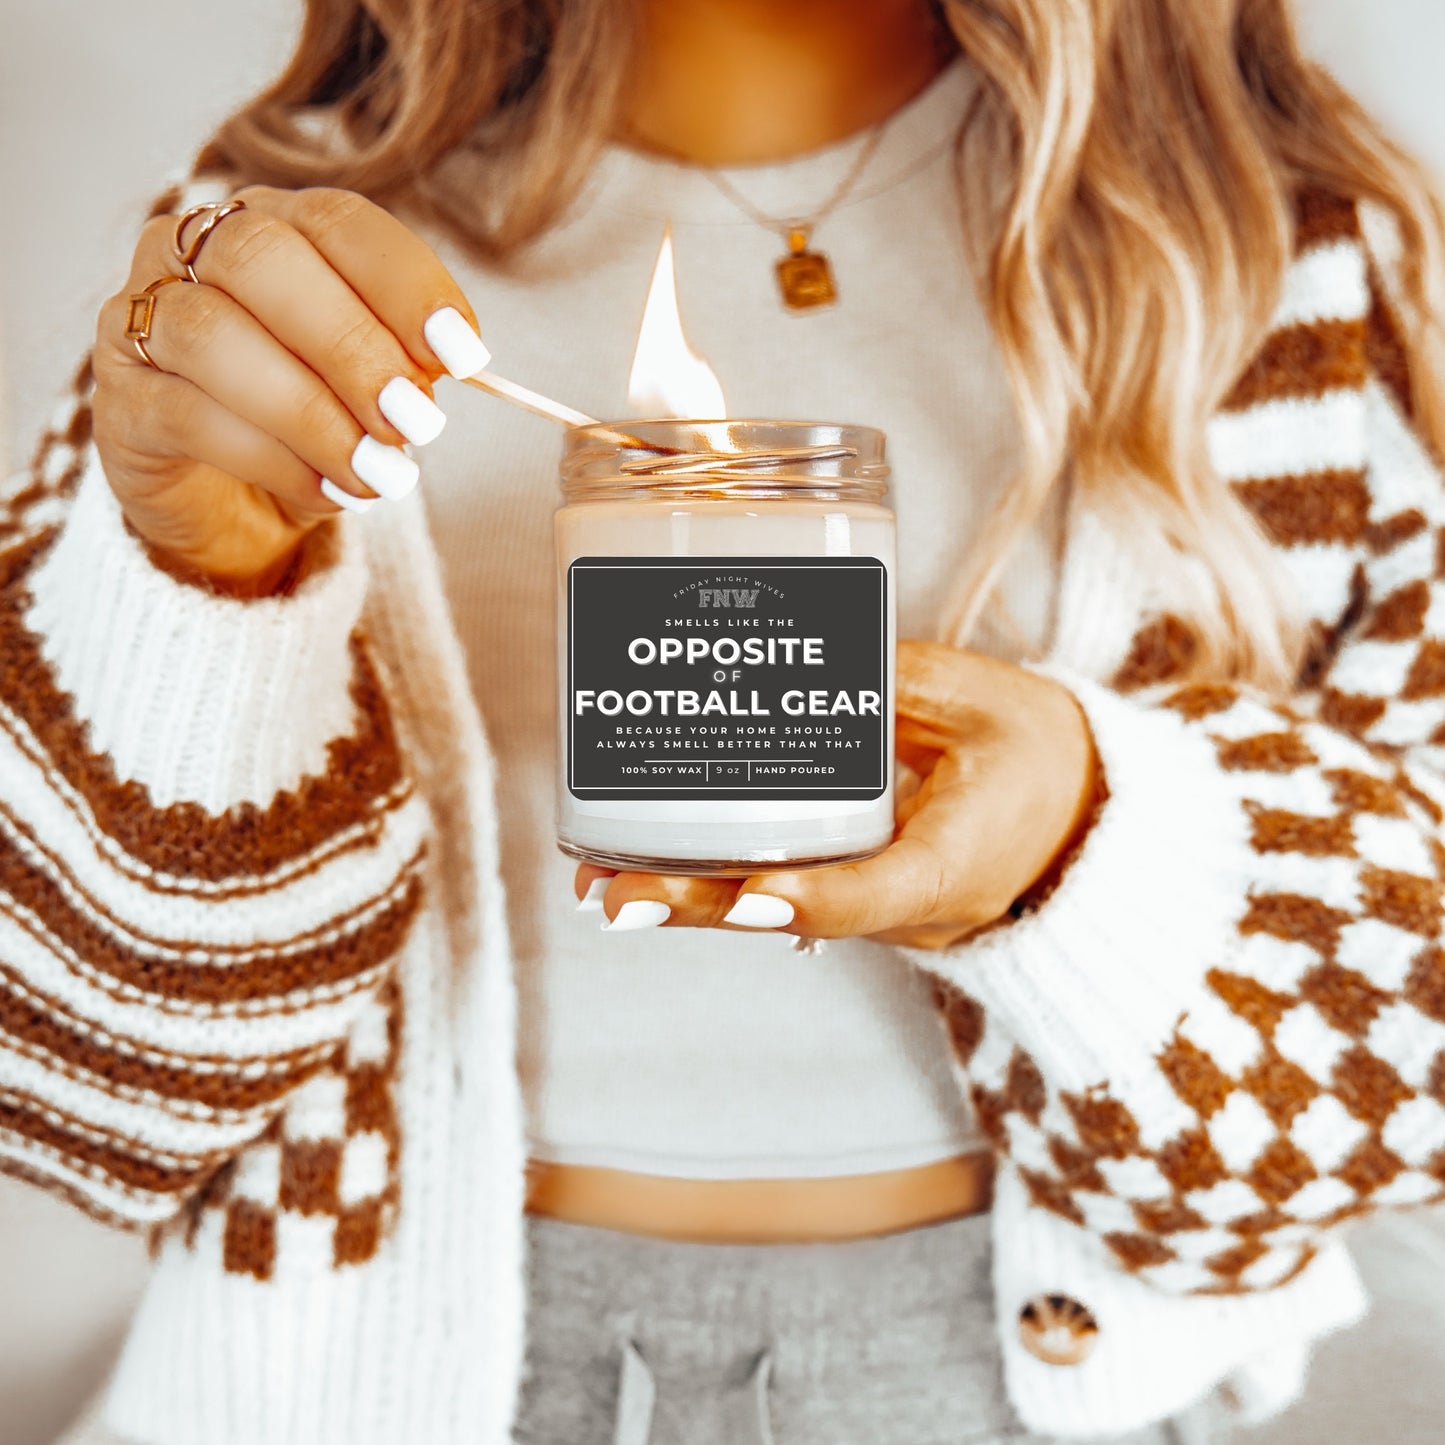 Smells like the "Opposite of Sports Gear" 9 oz Candle {Choose Your Sport}